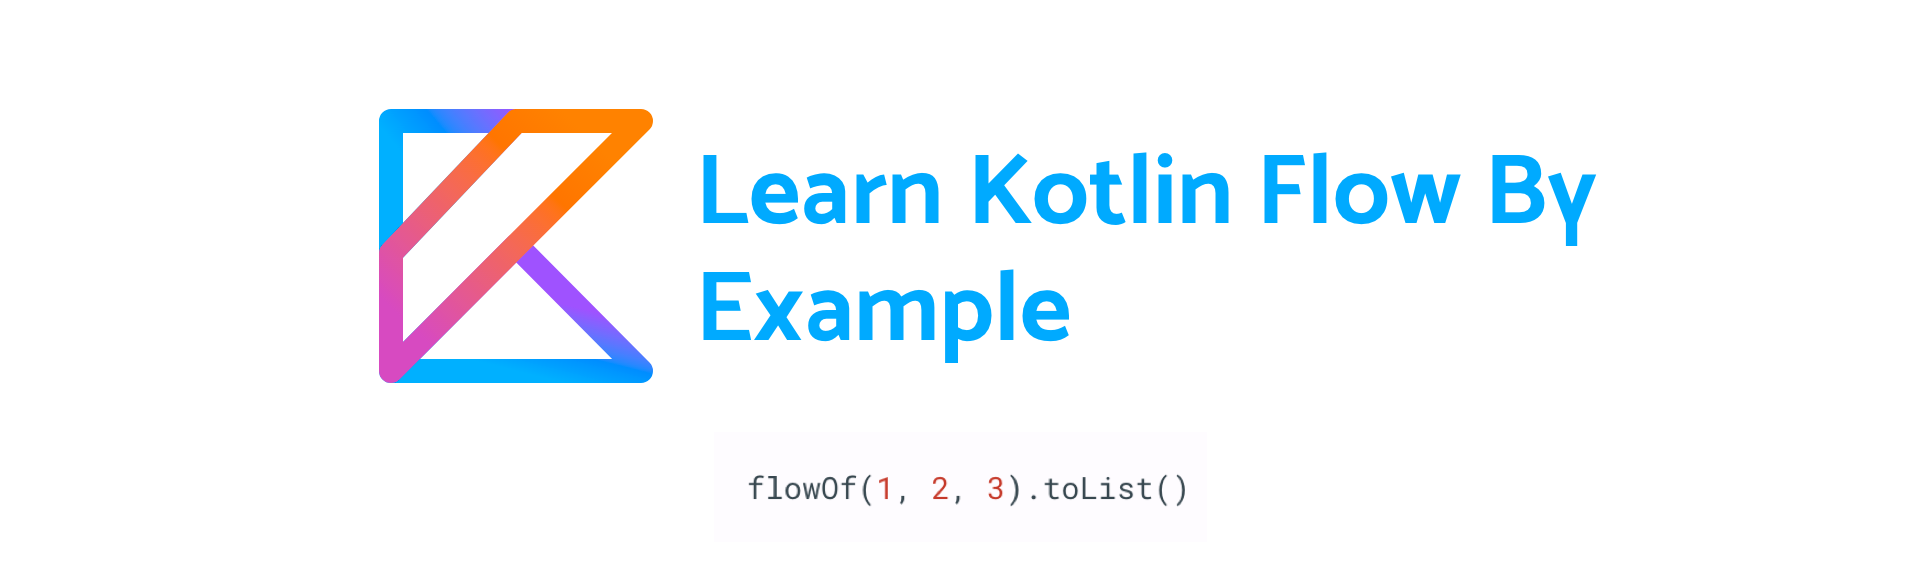 Kotlin-Flow-Android-Examples